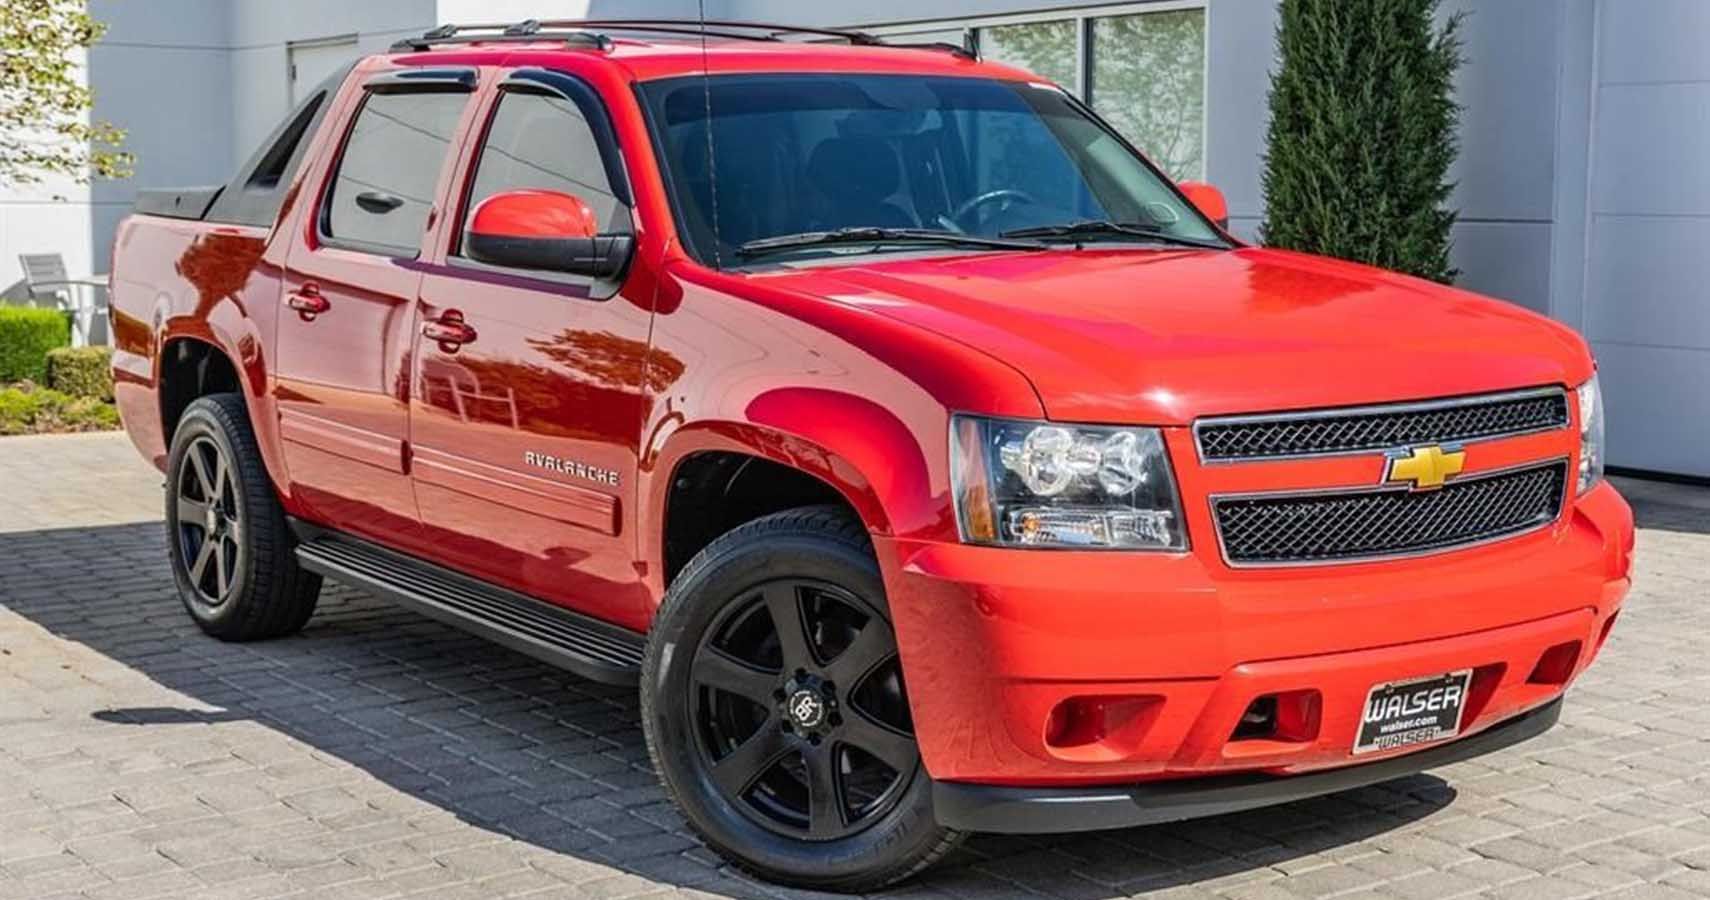 The Best Year Of Chevrolet Avalanche Is 2011